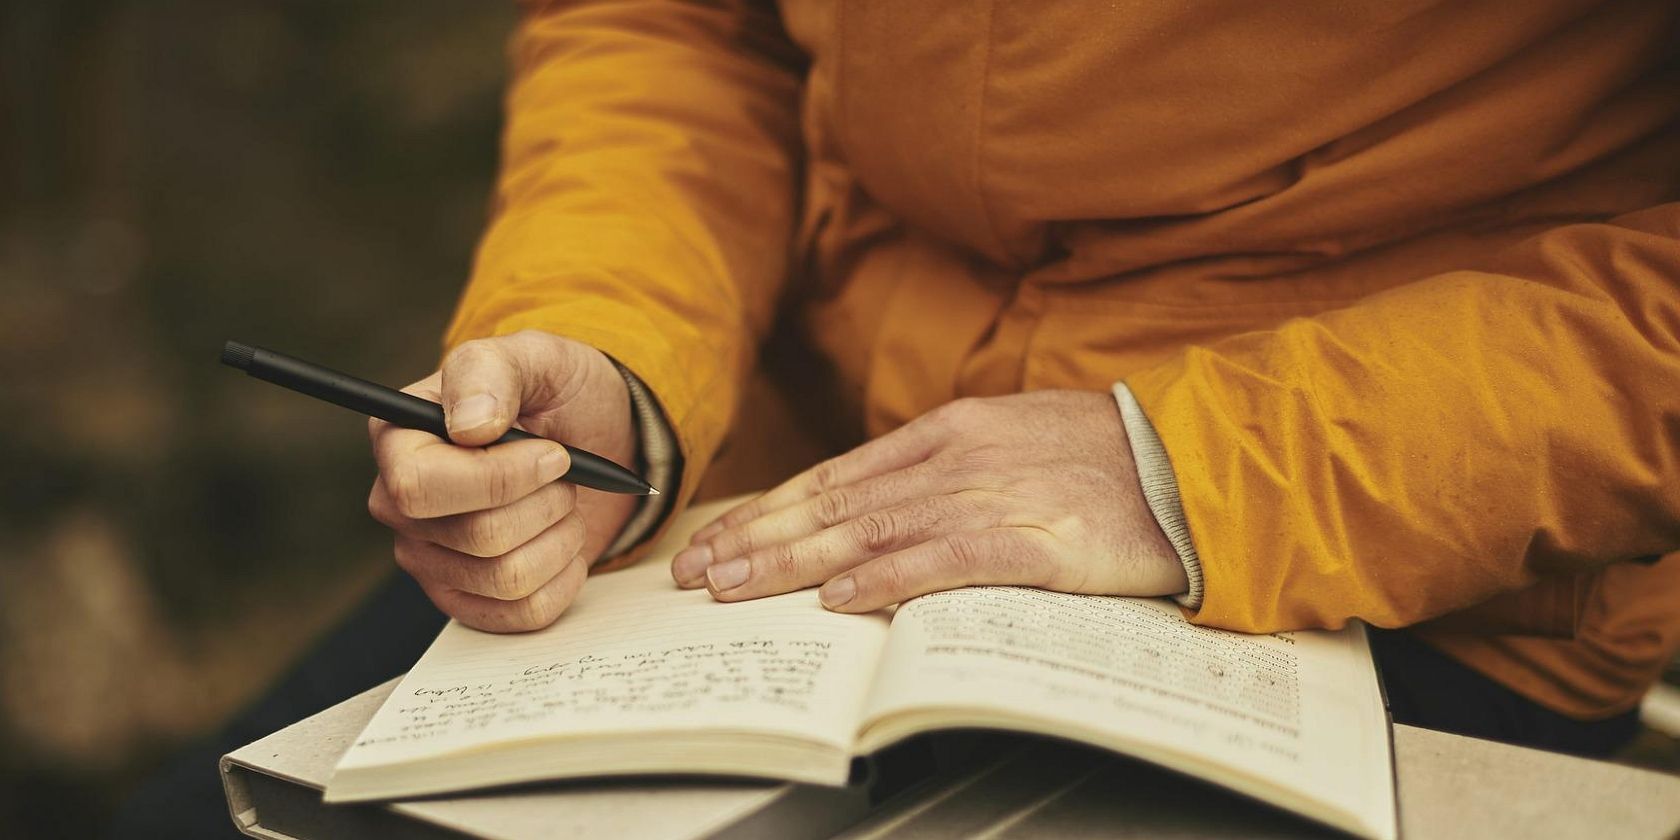 a picture showing someone writing in a book